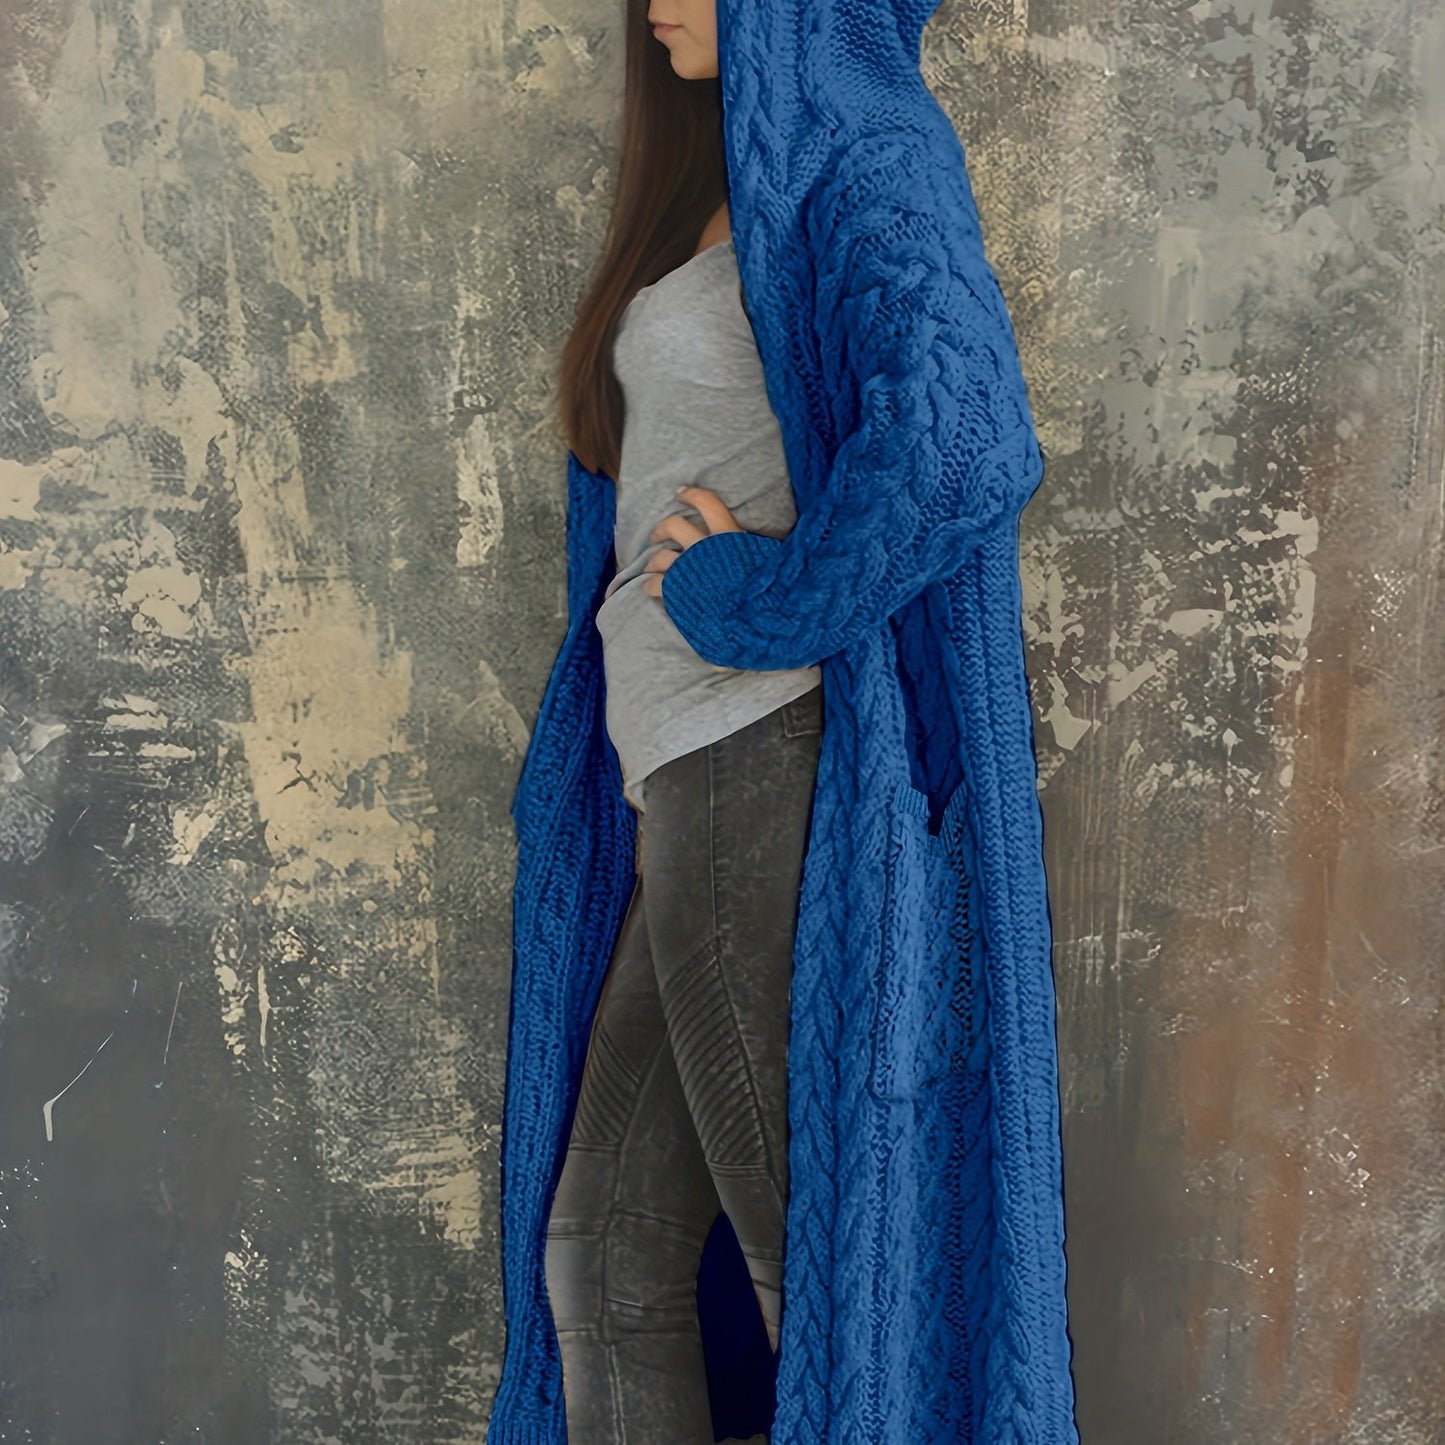 Plus Size Women's Solid Color Hooded Cardigan Coat, Casual Knitted Sweater Coat Royal Blue